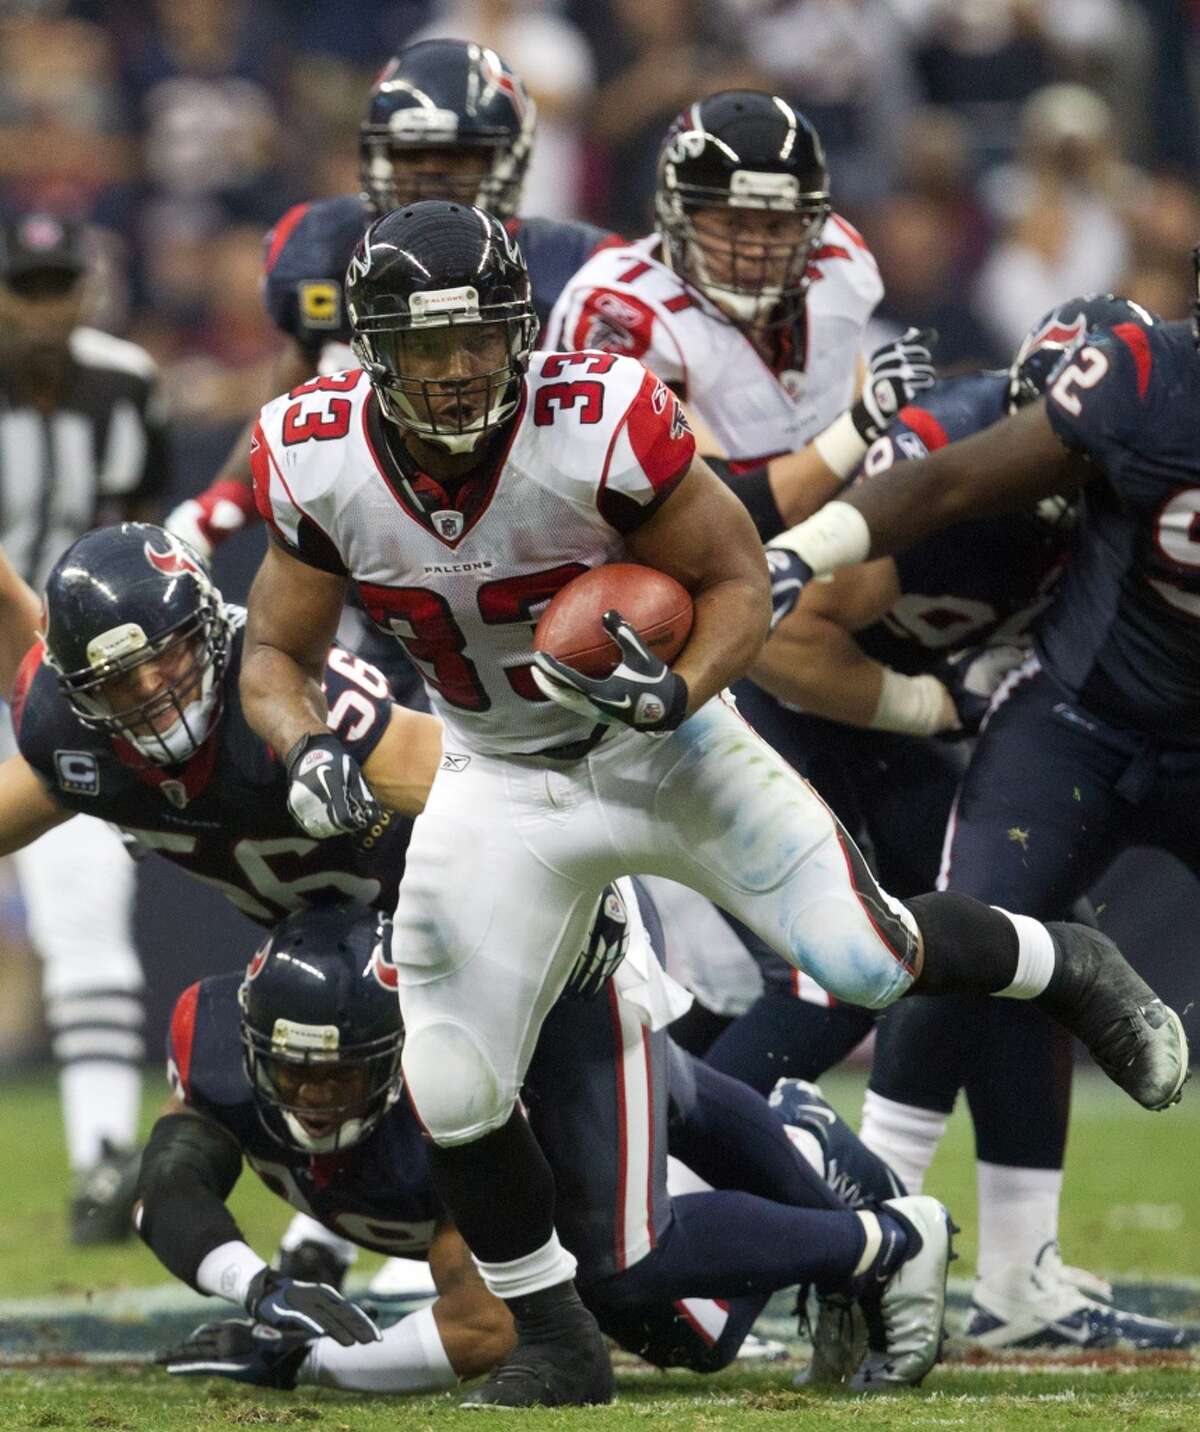 Atlanta: Michael Turner, running back Desperate for a running back, the Falcons signed Turner away from San Diego. He provided the Falcons with the kind of running game the coaches wanted, producing three 1,000-yard seasons.